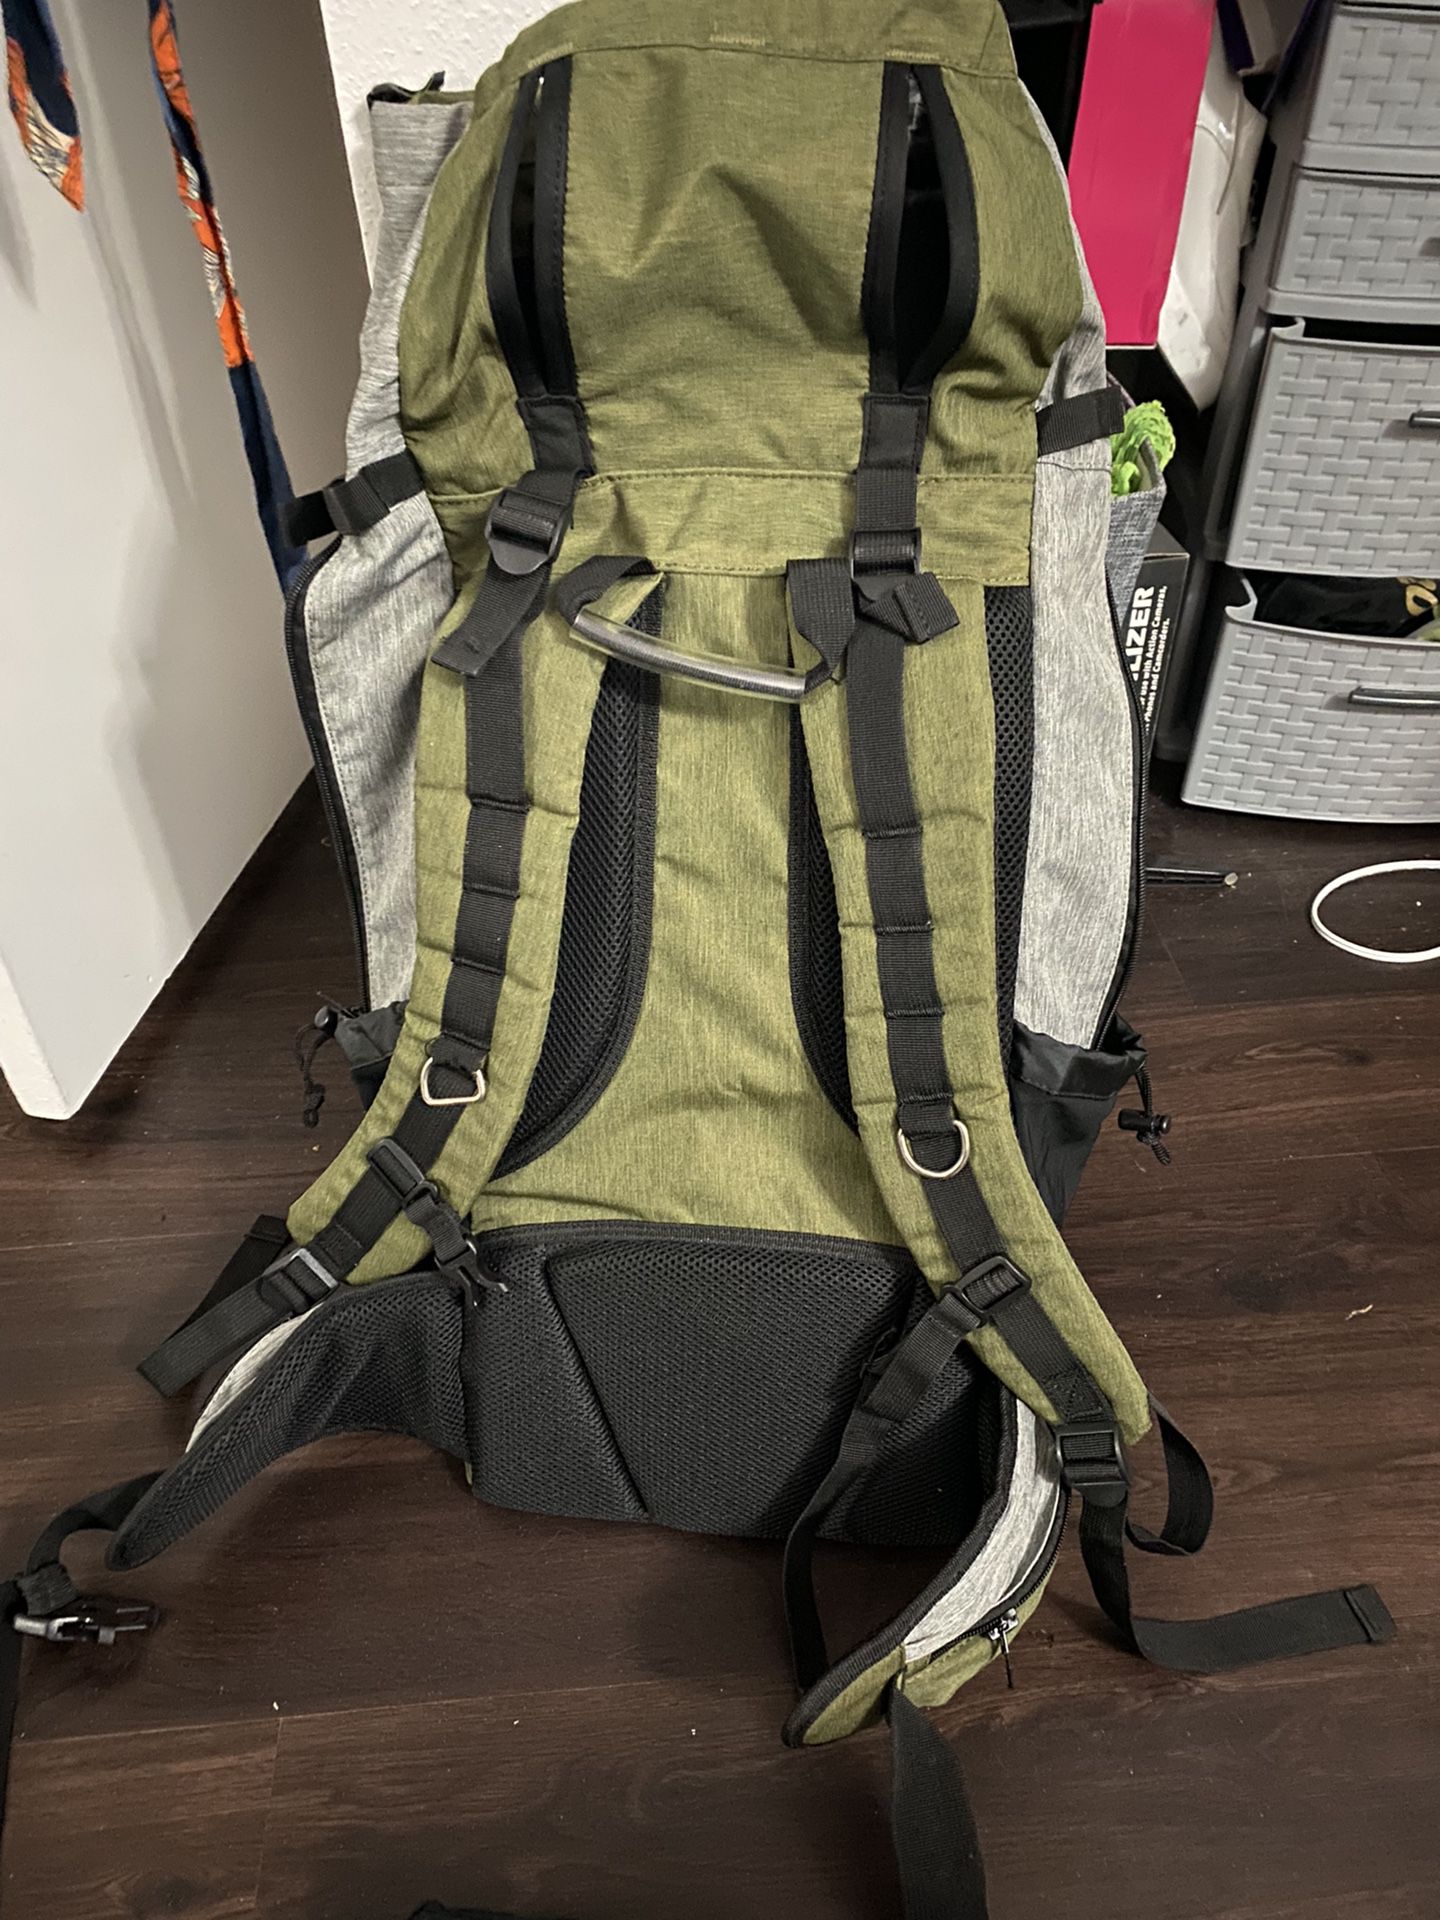 K9 Sport Sack Air 2 Forward Facing Dog Carrier Backpack, Jet balck, Small  My Price Is Firm for Sale in Pembroke Pines, FL - OfferUp